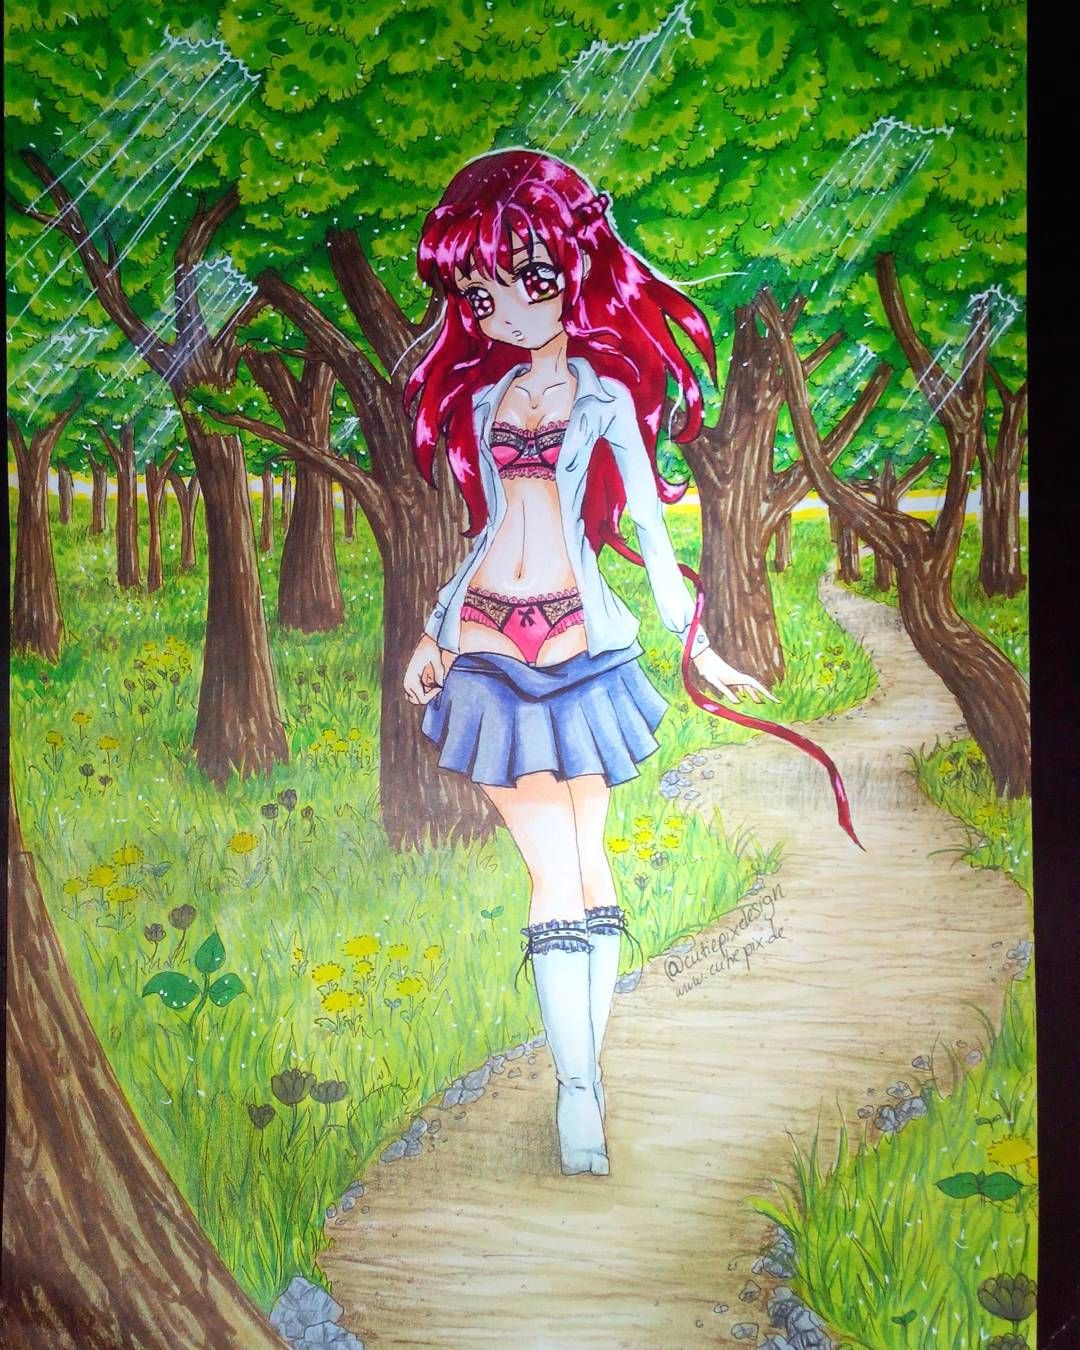 Drawing Girl Nature Finely Done Woah This Was A Hard Way I Never Draw Backgrounds and